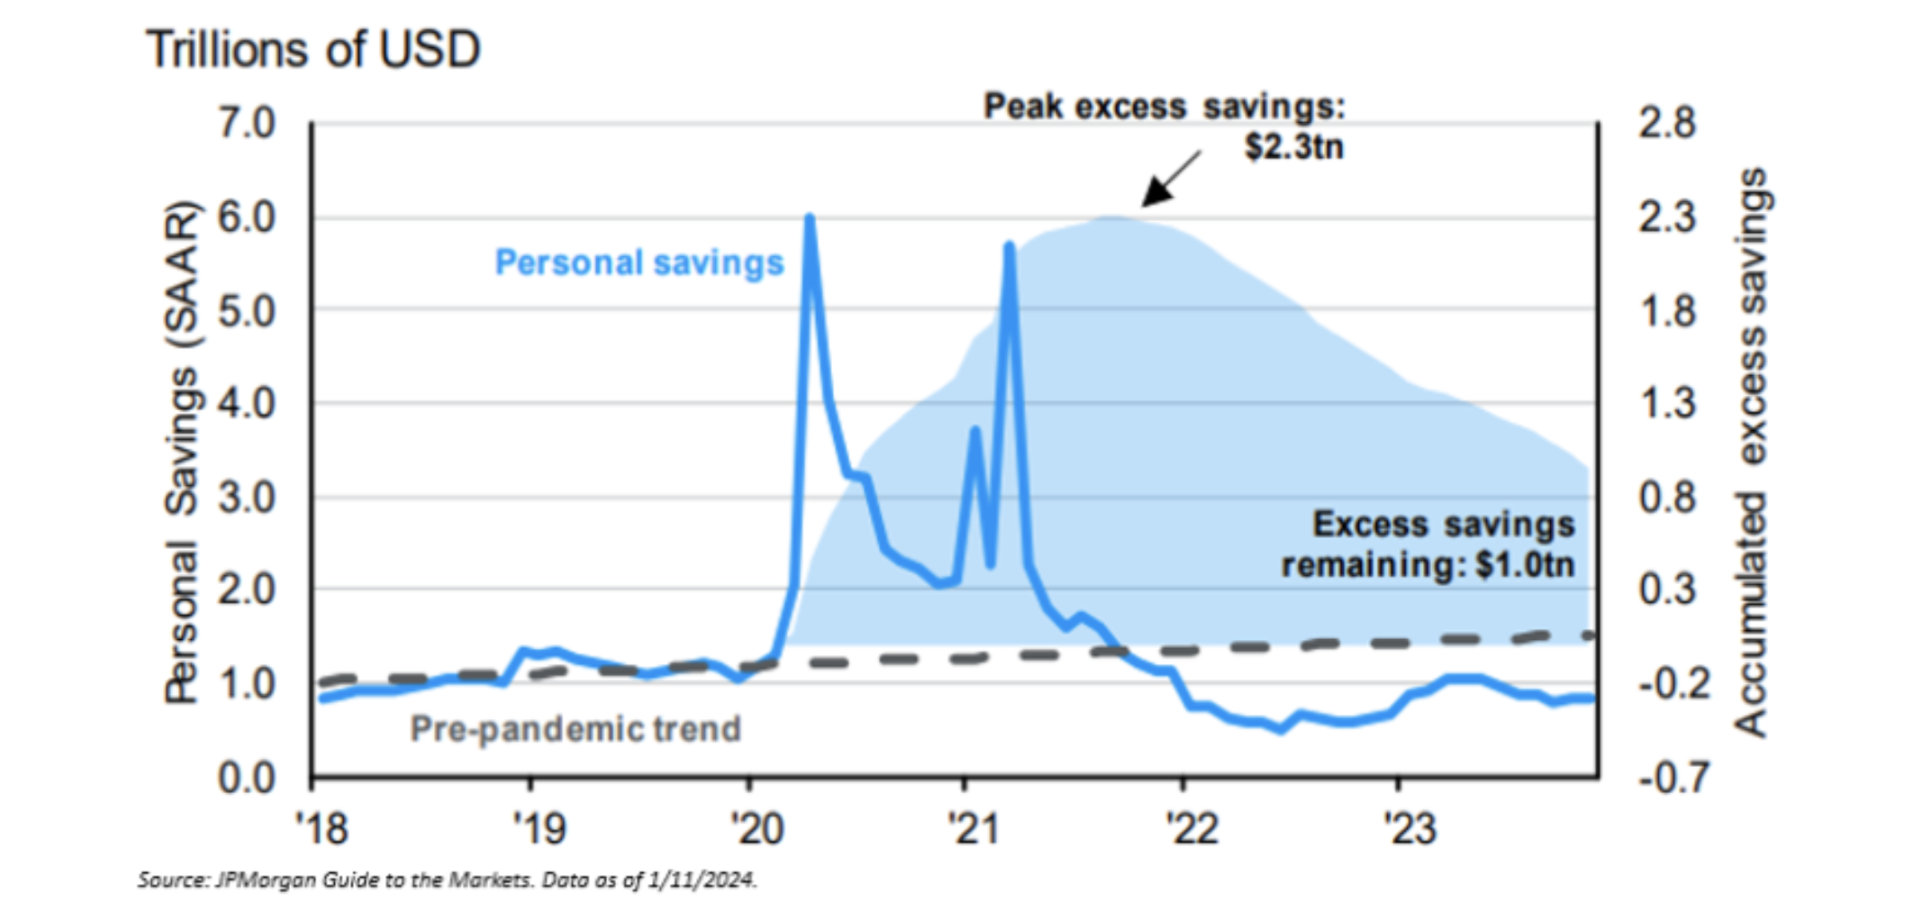 A comparison of personal savings and excess savings from 2018 to the end of 2023.